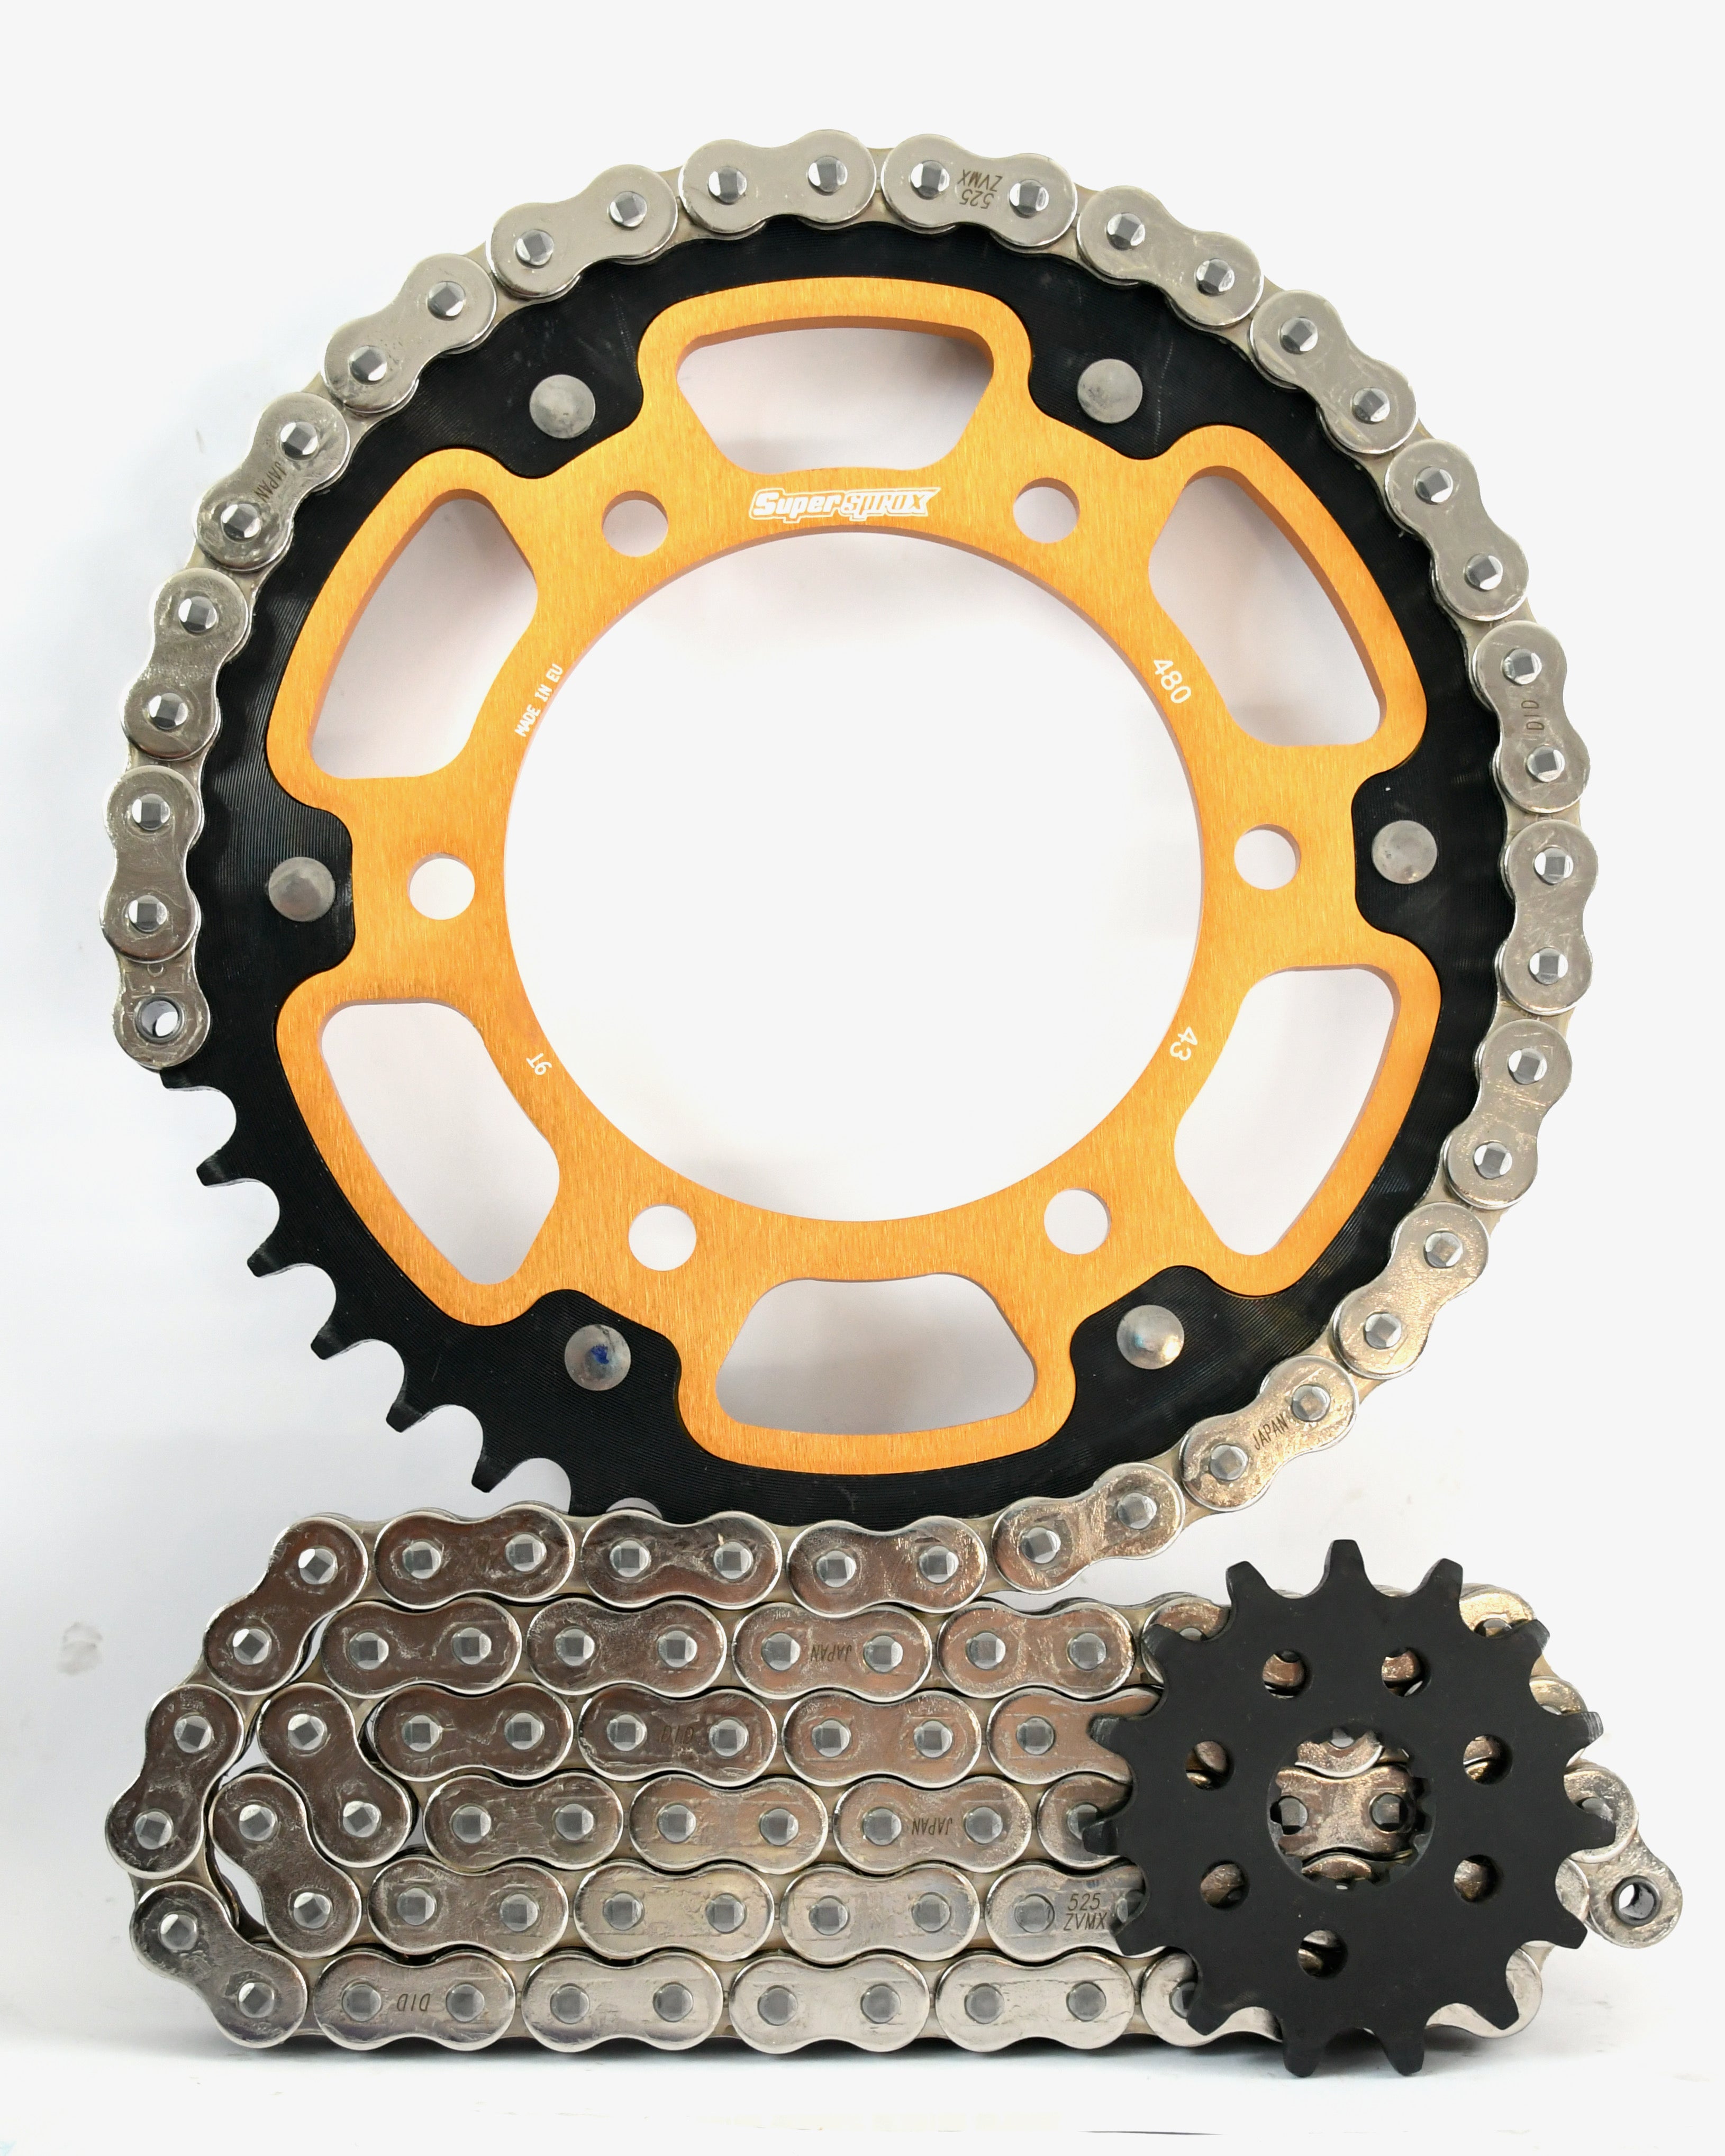 Supersprox Chain & Sprocket Kit for Aprilia RSV4 1100 Factory 2019> - Standard Gearing